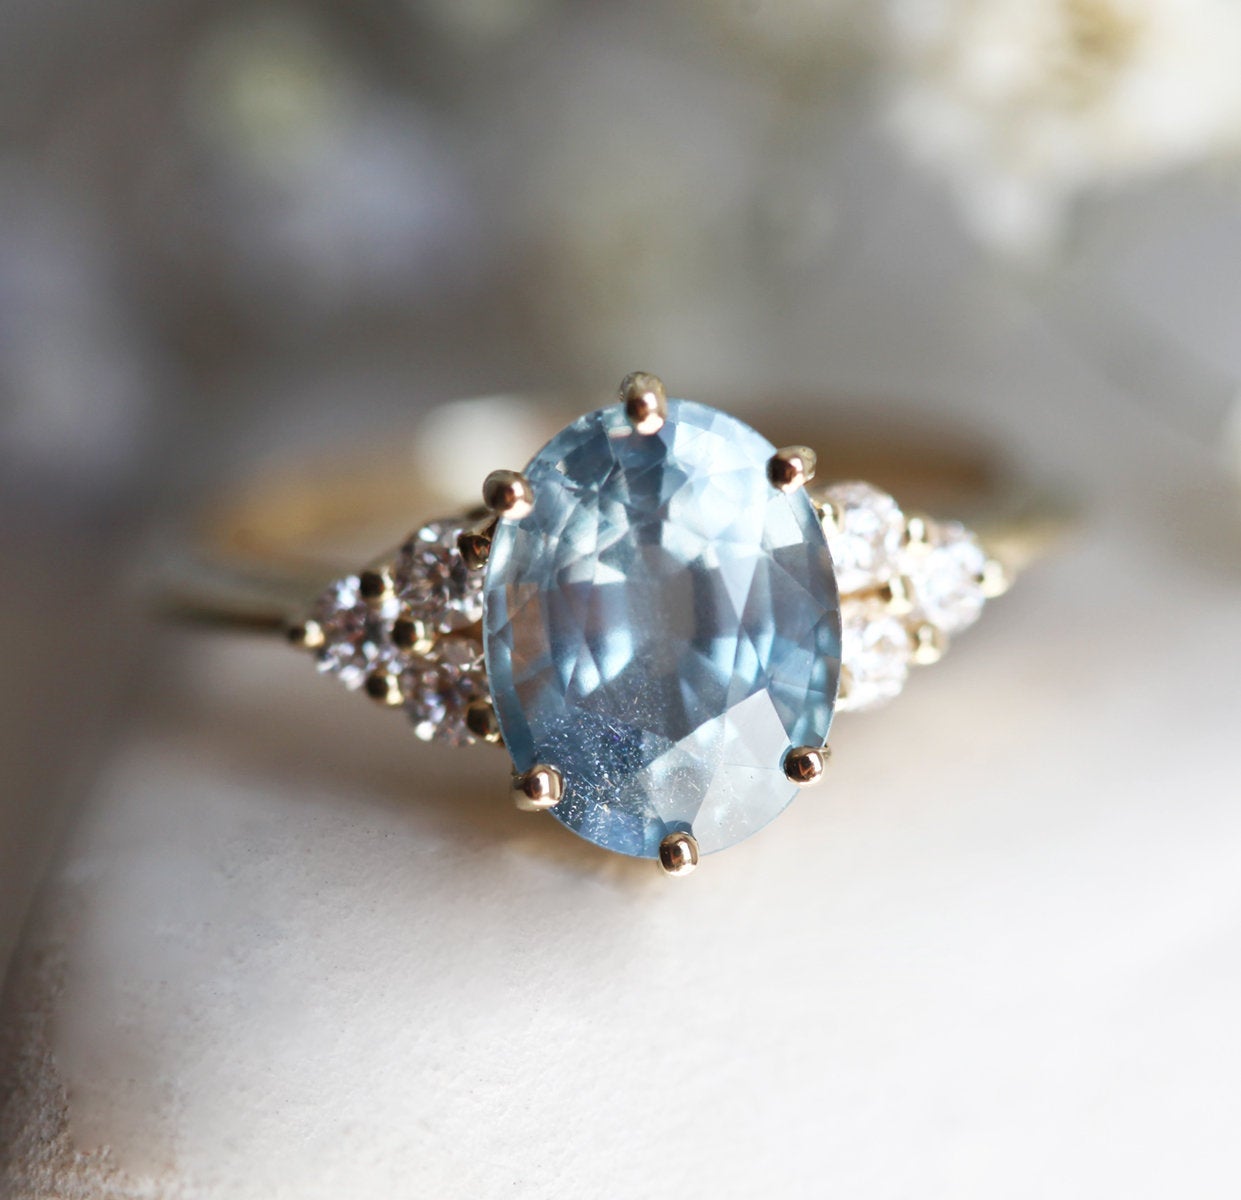 Oval-shaped blue sapphire ring with diamond cluster